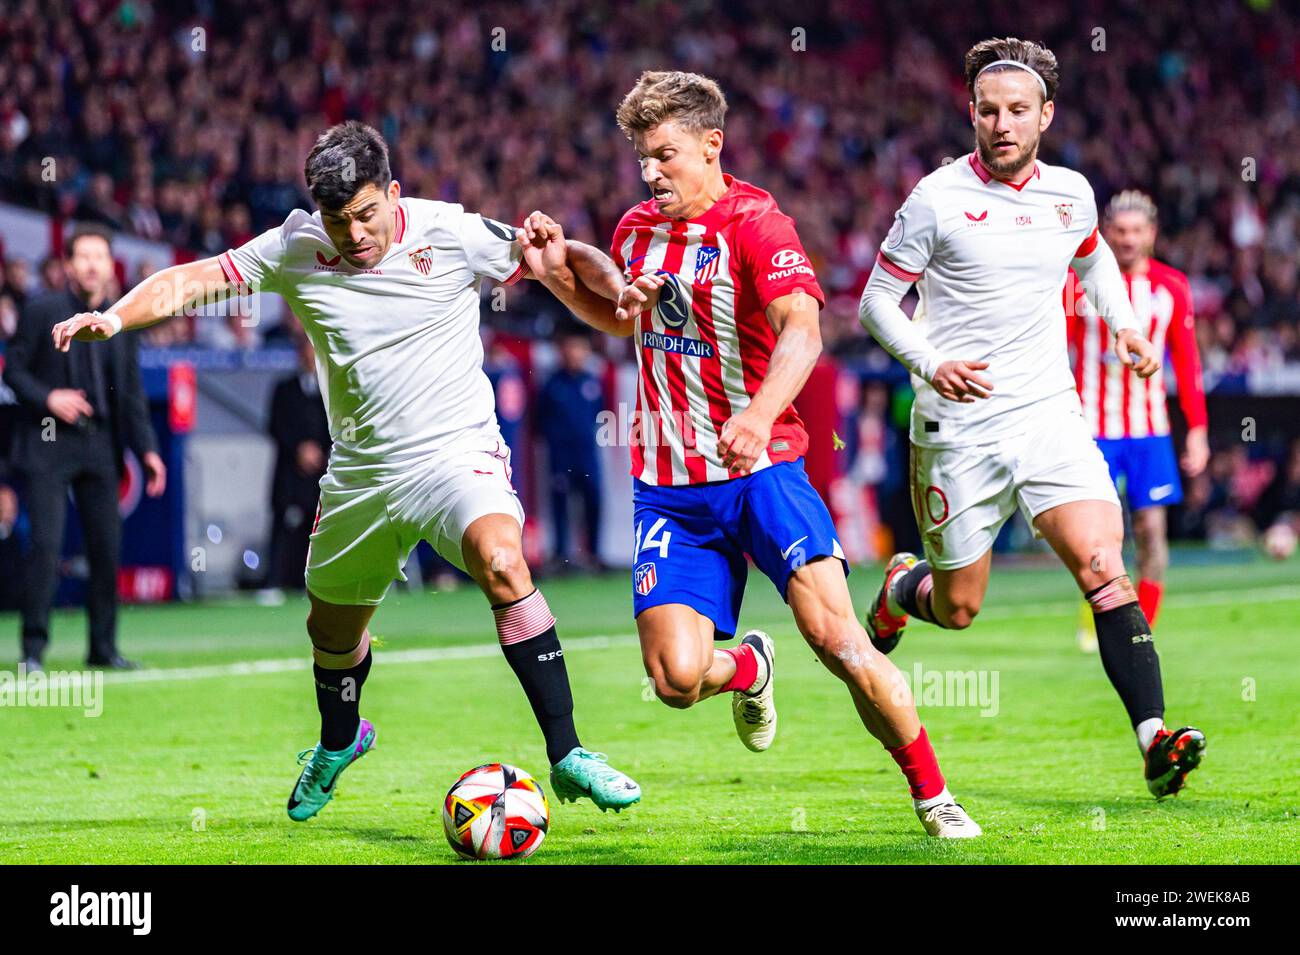 Madrid, Spain. 25th Jan, 2024. Marcos Llorente (C) of Atletico Madrid, Marcos Acuna (L) and Ivan Rakitic (R) of Sevilla in action during the football match valid for quarter finals of the Copa del Rey tournament between Atletico Madrid and Sevilla played at Estadio Metropolitano. Atletico Madrid 1 : 0 Sevilla Credit: SOPA Images Limited/Alamy Live News Stock Photo